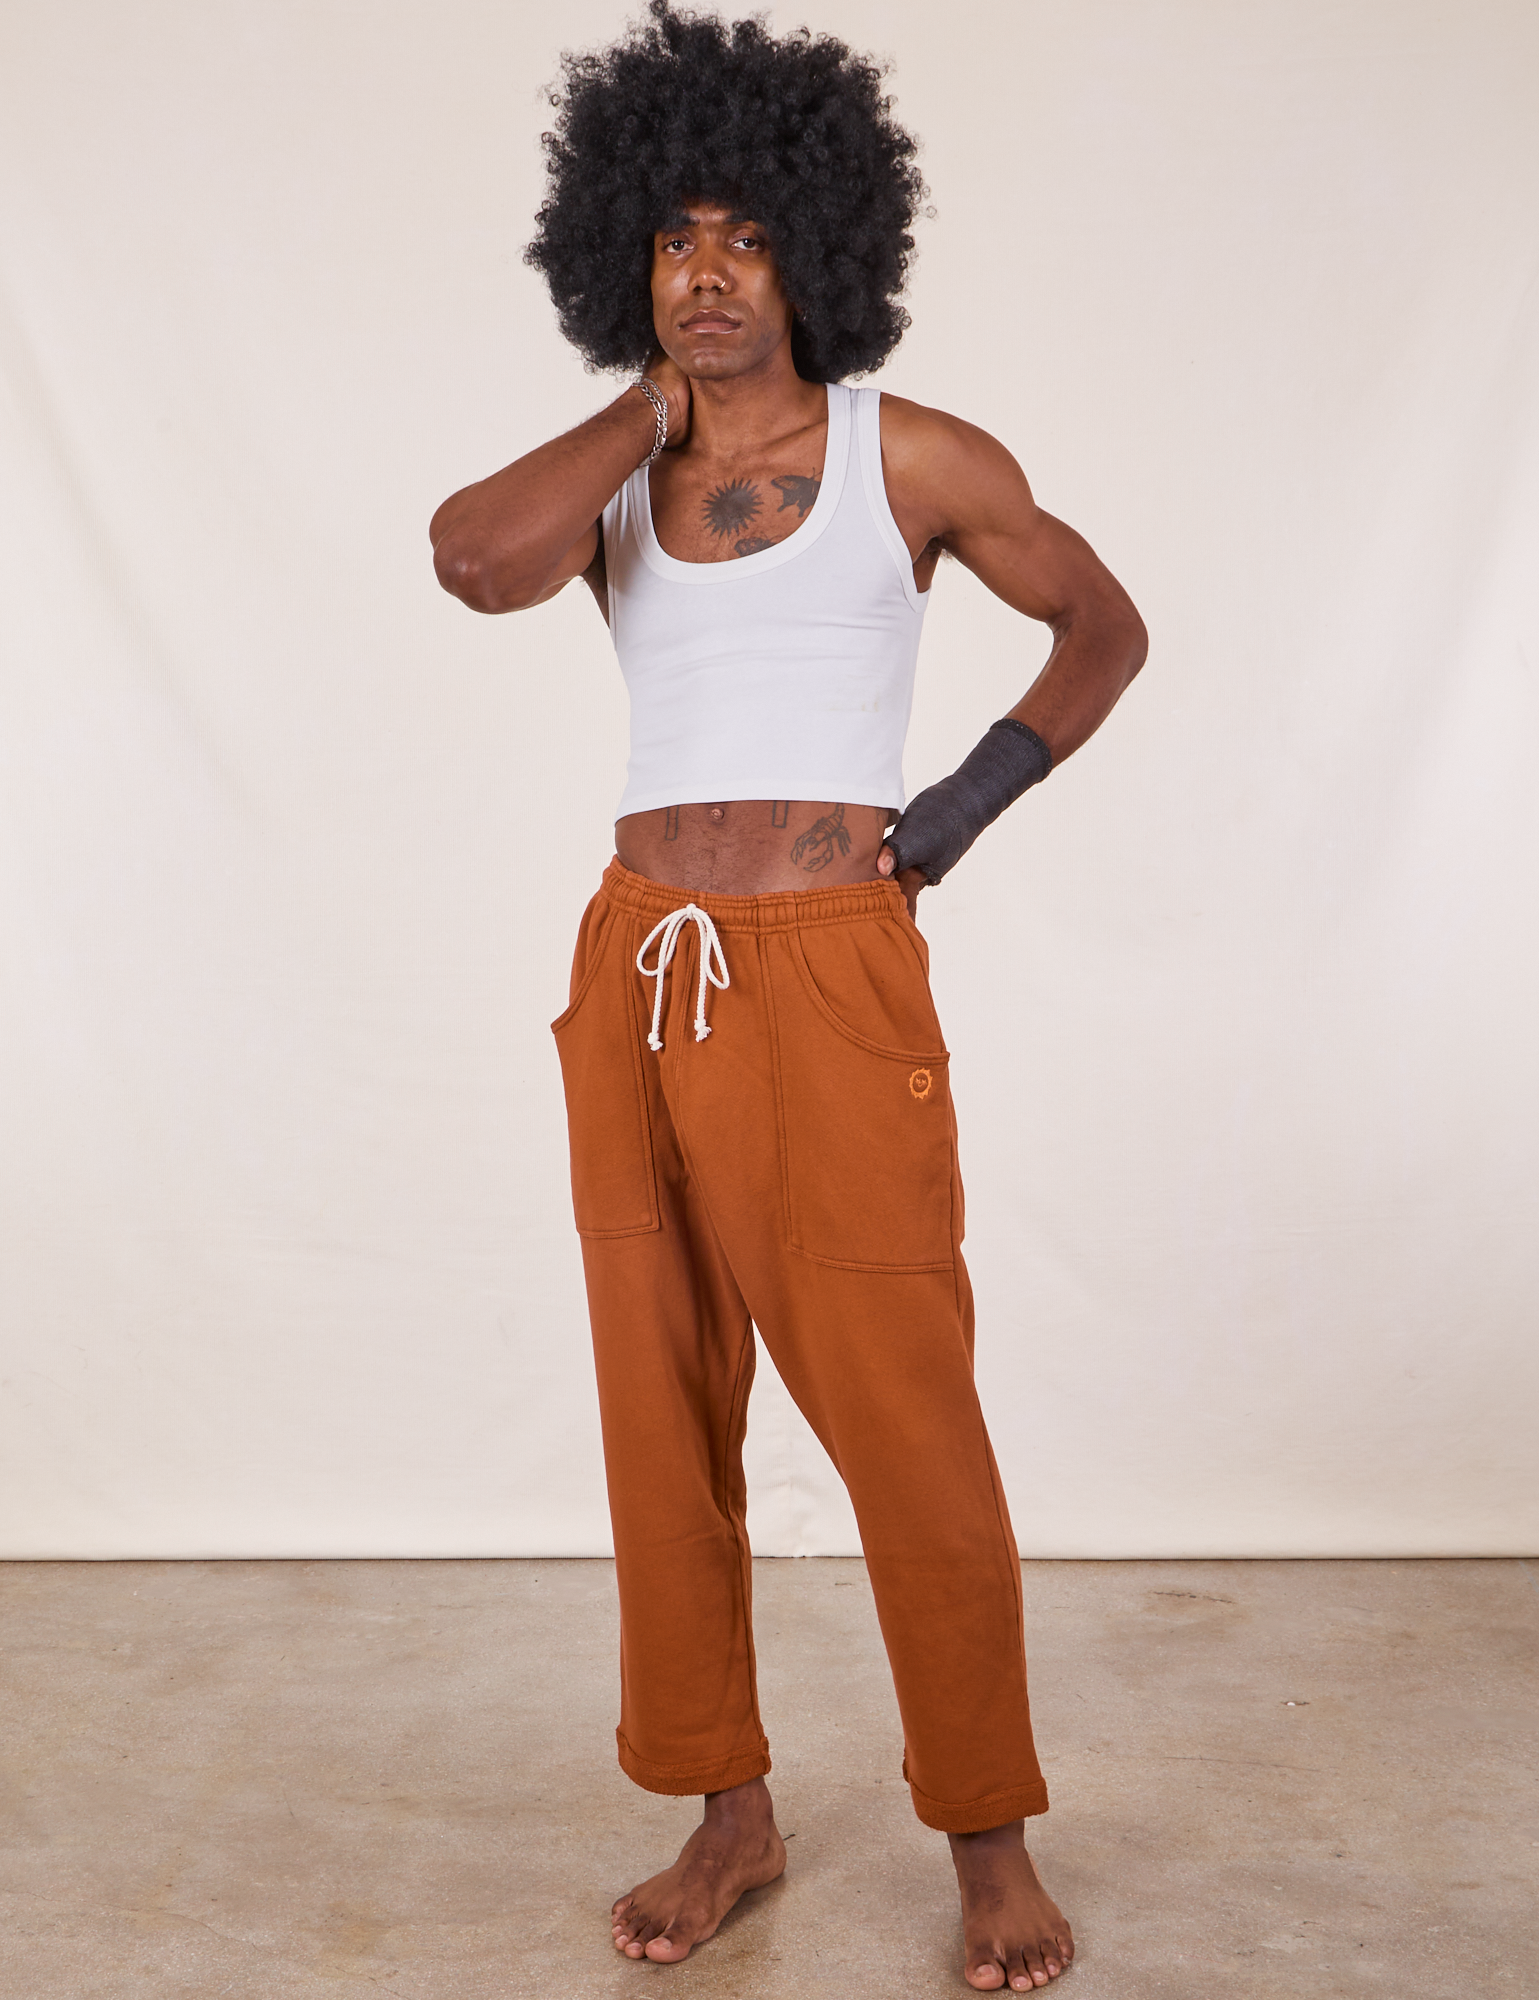 Jerrod is 6&#39;3&quot; and wearing M Cropped Rolled Cuff Sweatpants in Burnt Terracotta paired with vintage off-white Cropped Tank Top